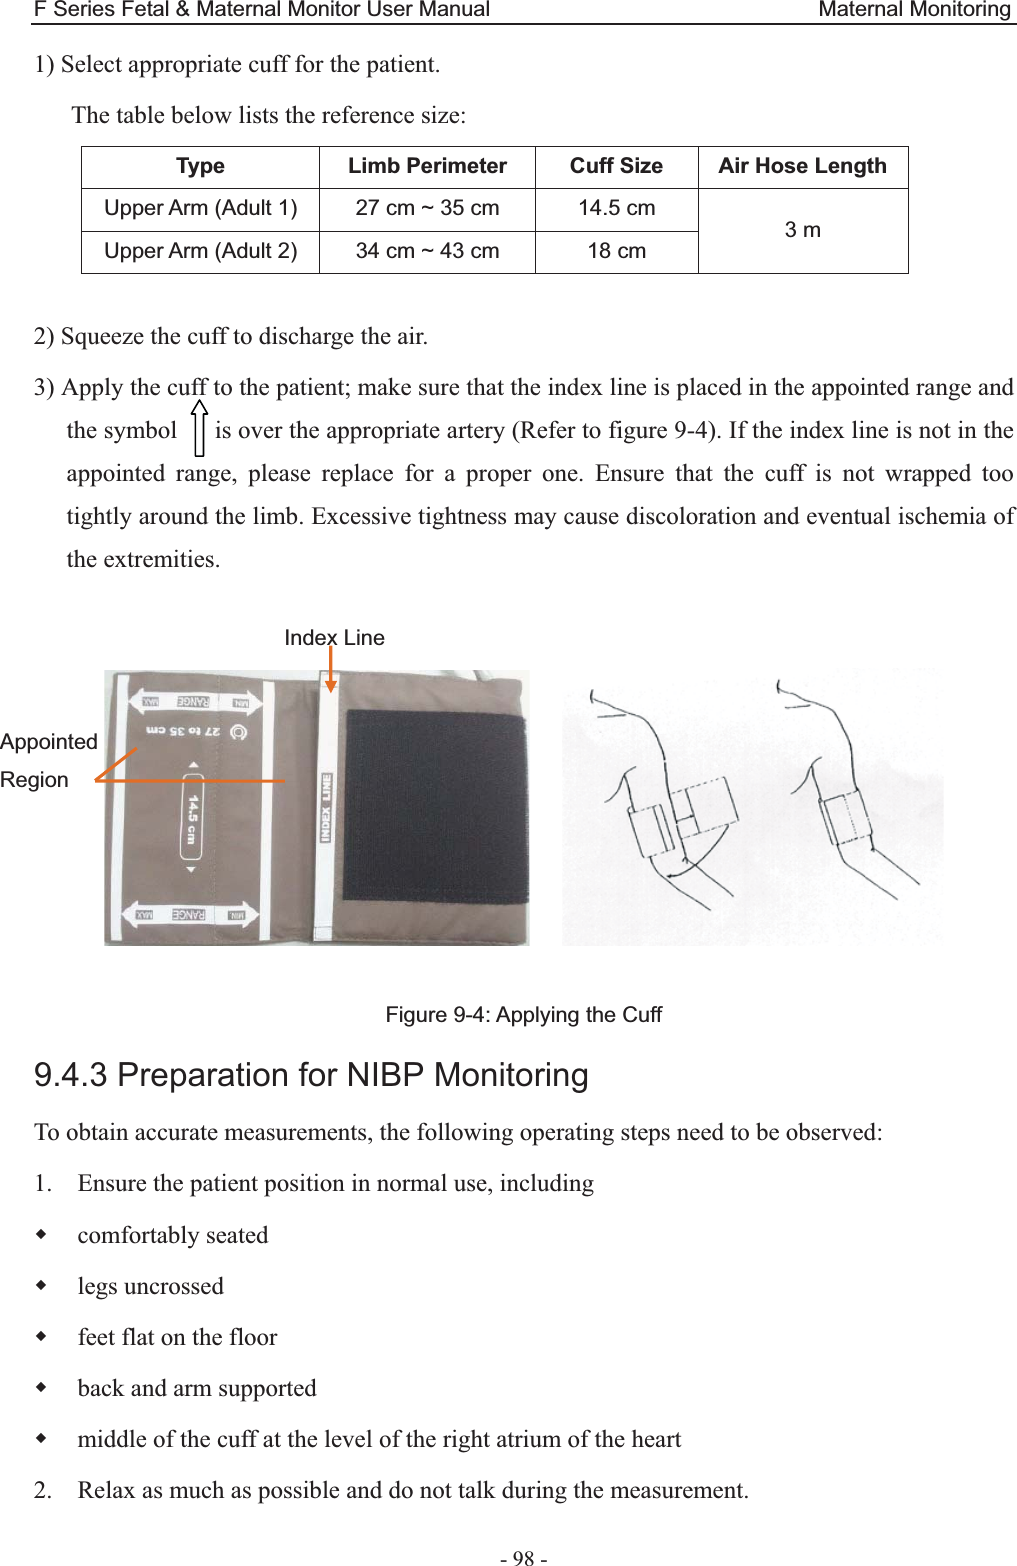 F Series Fetal &amp; Maternal Monitor User Manual                              Maternal Monitoring - 98 - 1) Select appropriate cuff for the patient. The table below lists the reference size: Type  Limb Perimeter  Cuff Size  Air Hose Length Upper Arm (Adult 1)  27 cm ~ 35 cm  14.5 cm  3 m Upper Arm (Adult 2)  34 cm ~ 43 cm  18 cm  2) Squeeze the cuff to discharge the air. 3) Apply the cuff to the patient; make sure that the index line is placed in the appointed range and the symbol      is over the appropriate artery (Refer to figure 9-4). If the index line is not in the appointed range, please replace for a proper one. Ensure that the cuff is not wrapped too tightly around the limb. Excessive tightness may cause discoloration and eventual ischemia of the extremities.        Figure 9-4: Applying the Cuff 9.4.3 Preparation for NIBP Monitoring To obtain accurate measurements, the following operating steps need to be observed: 1. Ensure the patient position in normal use, including  comfortably seated  legs uncrossed  feet flat on the floor  back and arm supported  middle of the cuff at the level of the right atrium of the heart 2. Relax as much as possible and do not talk during the measurement. Index Line Appointed Region 